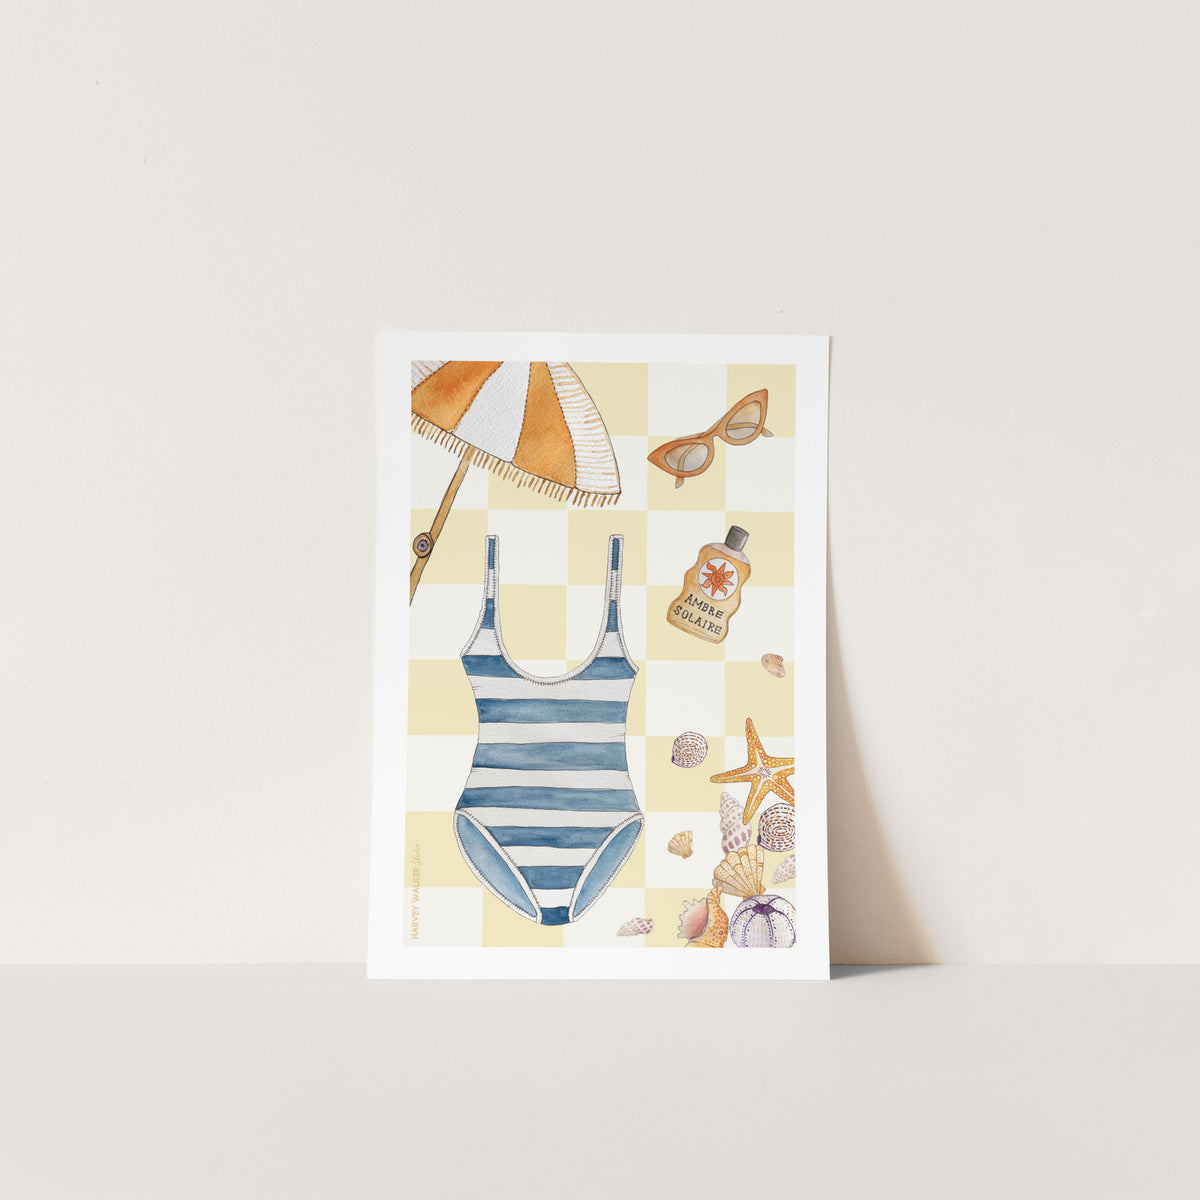 Unframed fine art print. Retreat to the beach with this yellow and white check print. With umbrellas, swimsuits and shells this print is perfect for giving you a feeling of being on holiday every day. Lovingly hand illustrated and great for house warming presents.